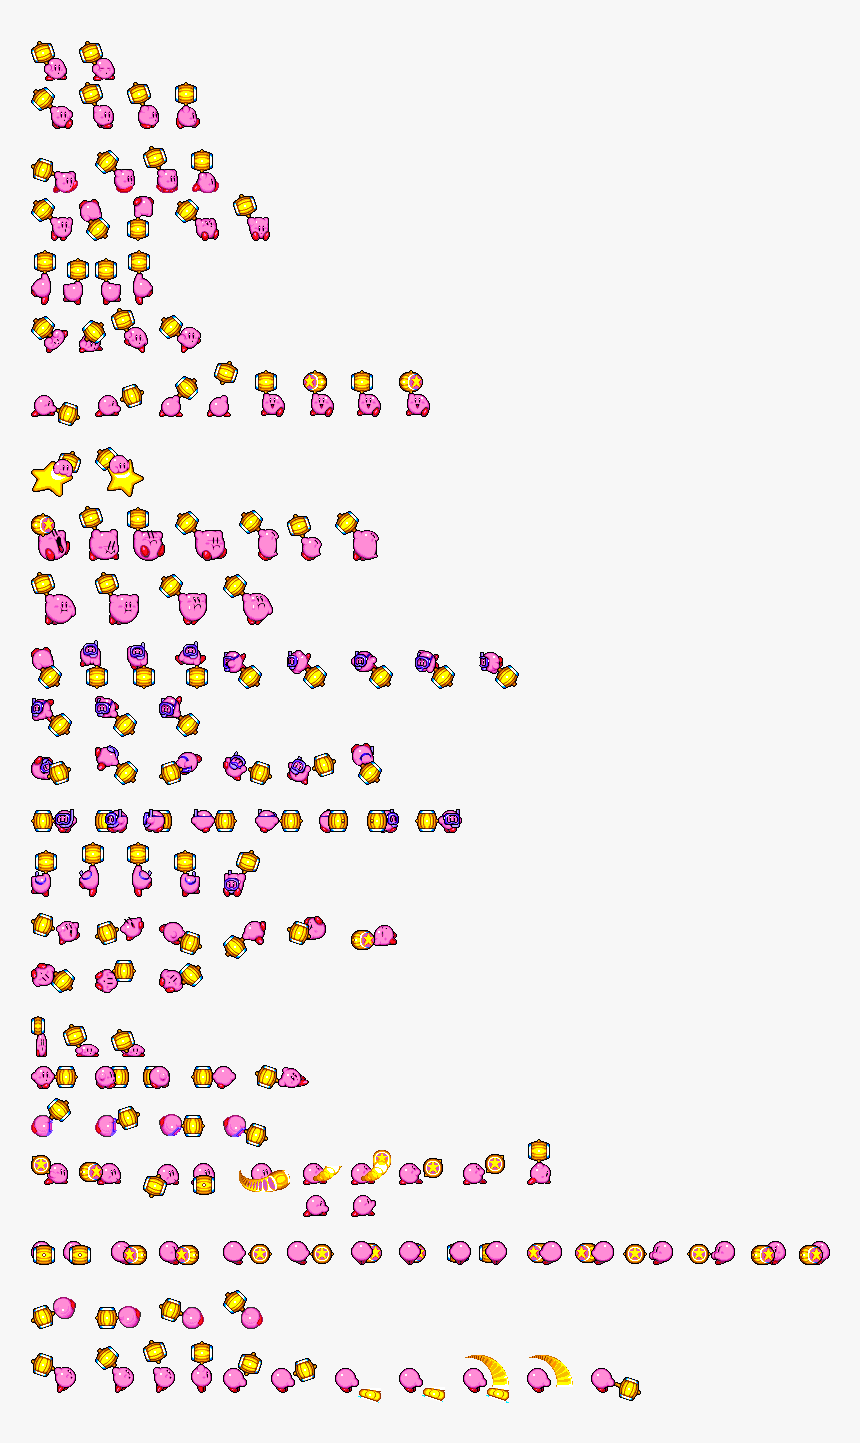 Transparent Kirby Sprite Png - Kirby Hammer Sprite Sheet, Png Download ...